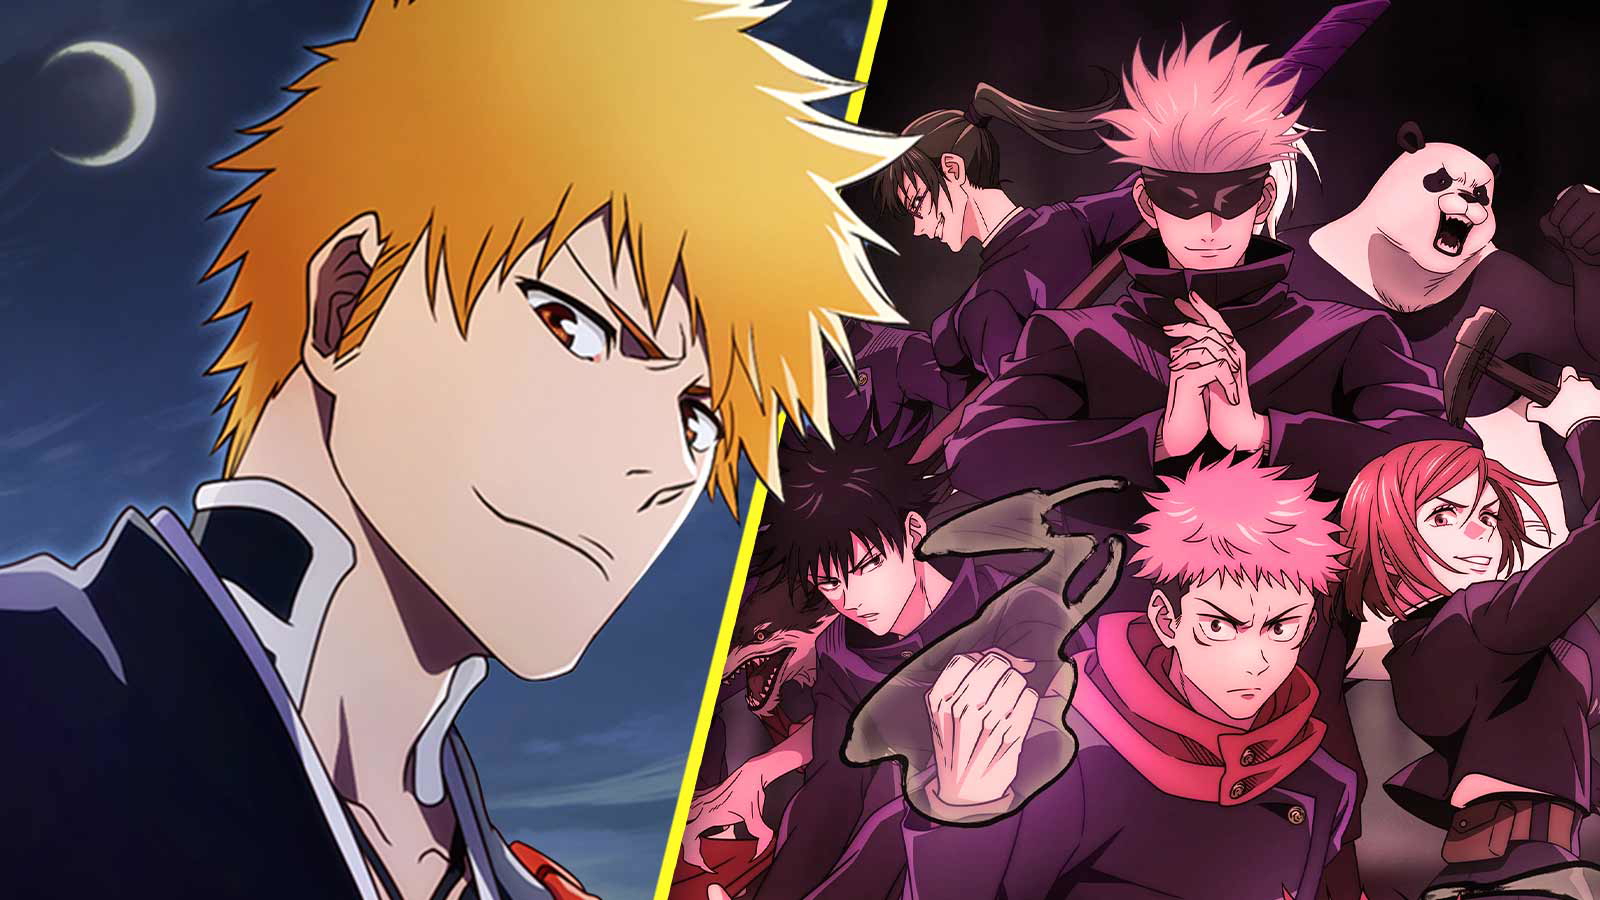 “Bro looks like a hollow”: Gege Akutami’s Inspiration from Tite Kubo’s Bleach Becomes More than Evident with Jujutsu Kaisen Panel that Enraged Every Fan